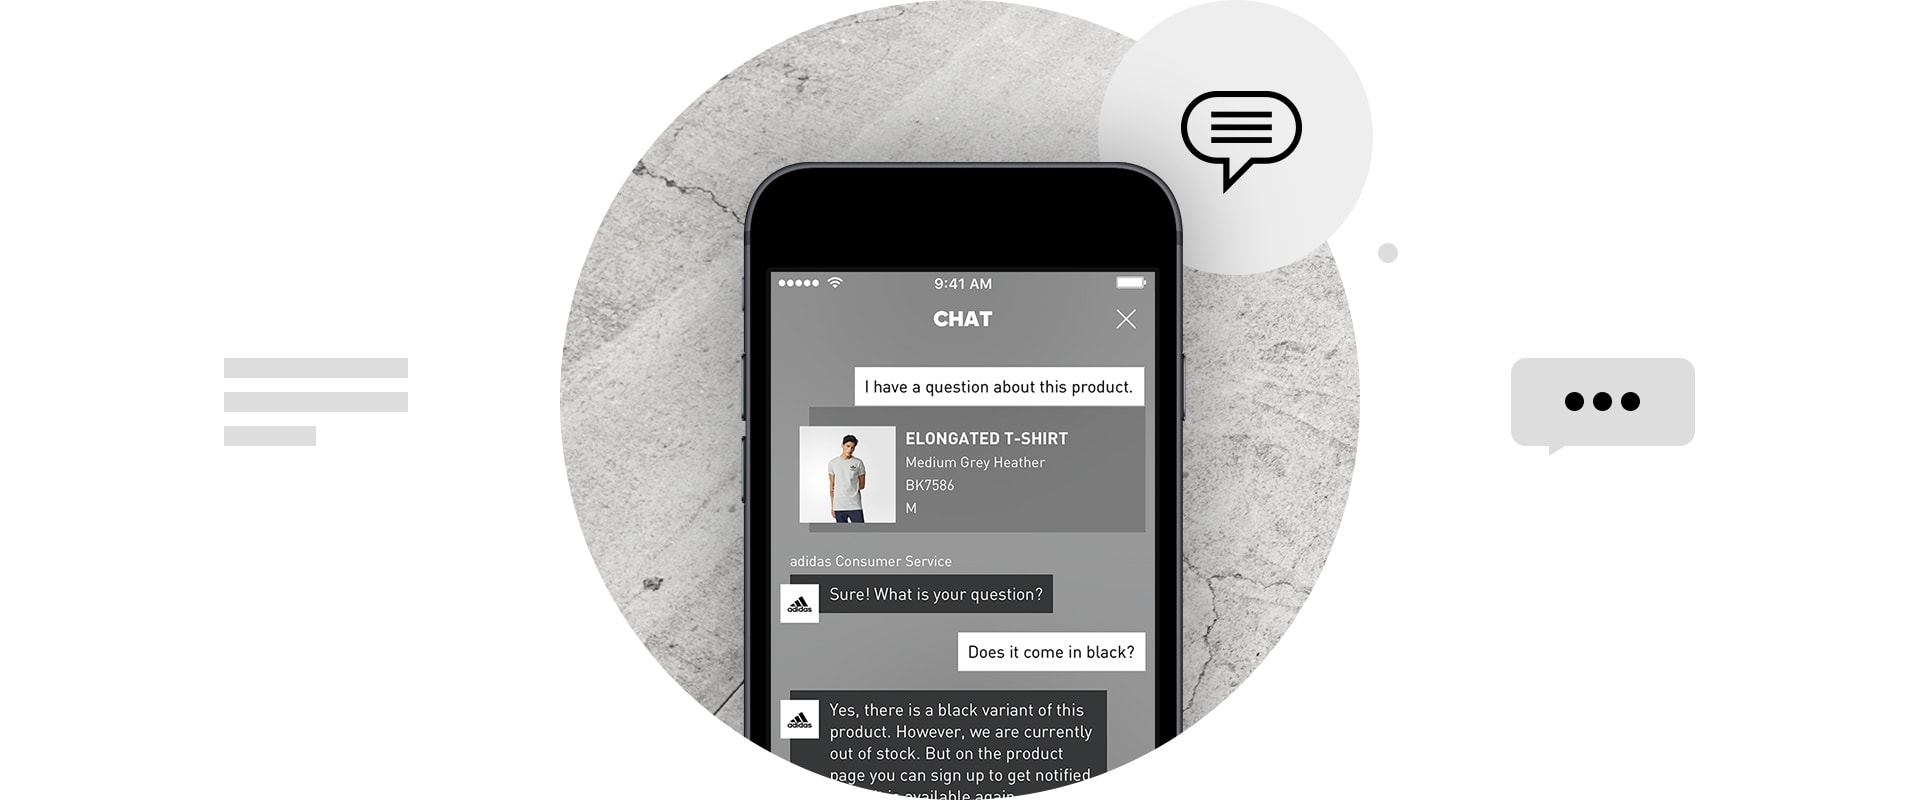 adidas live chat